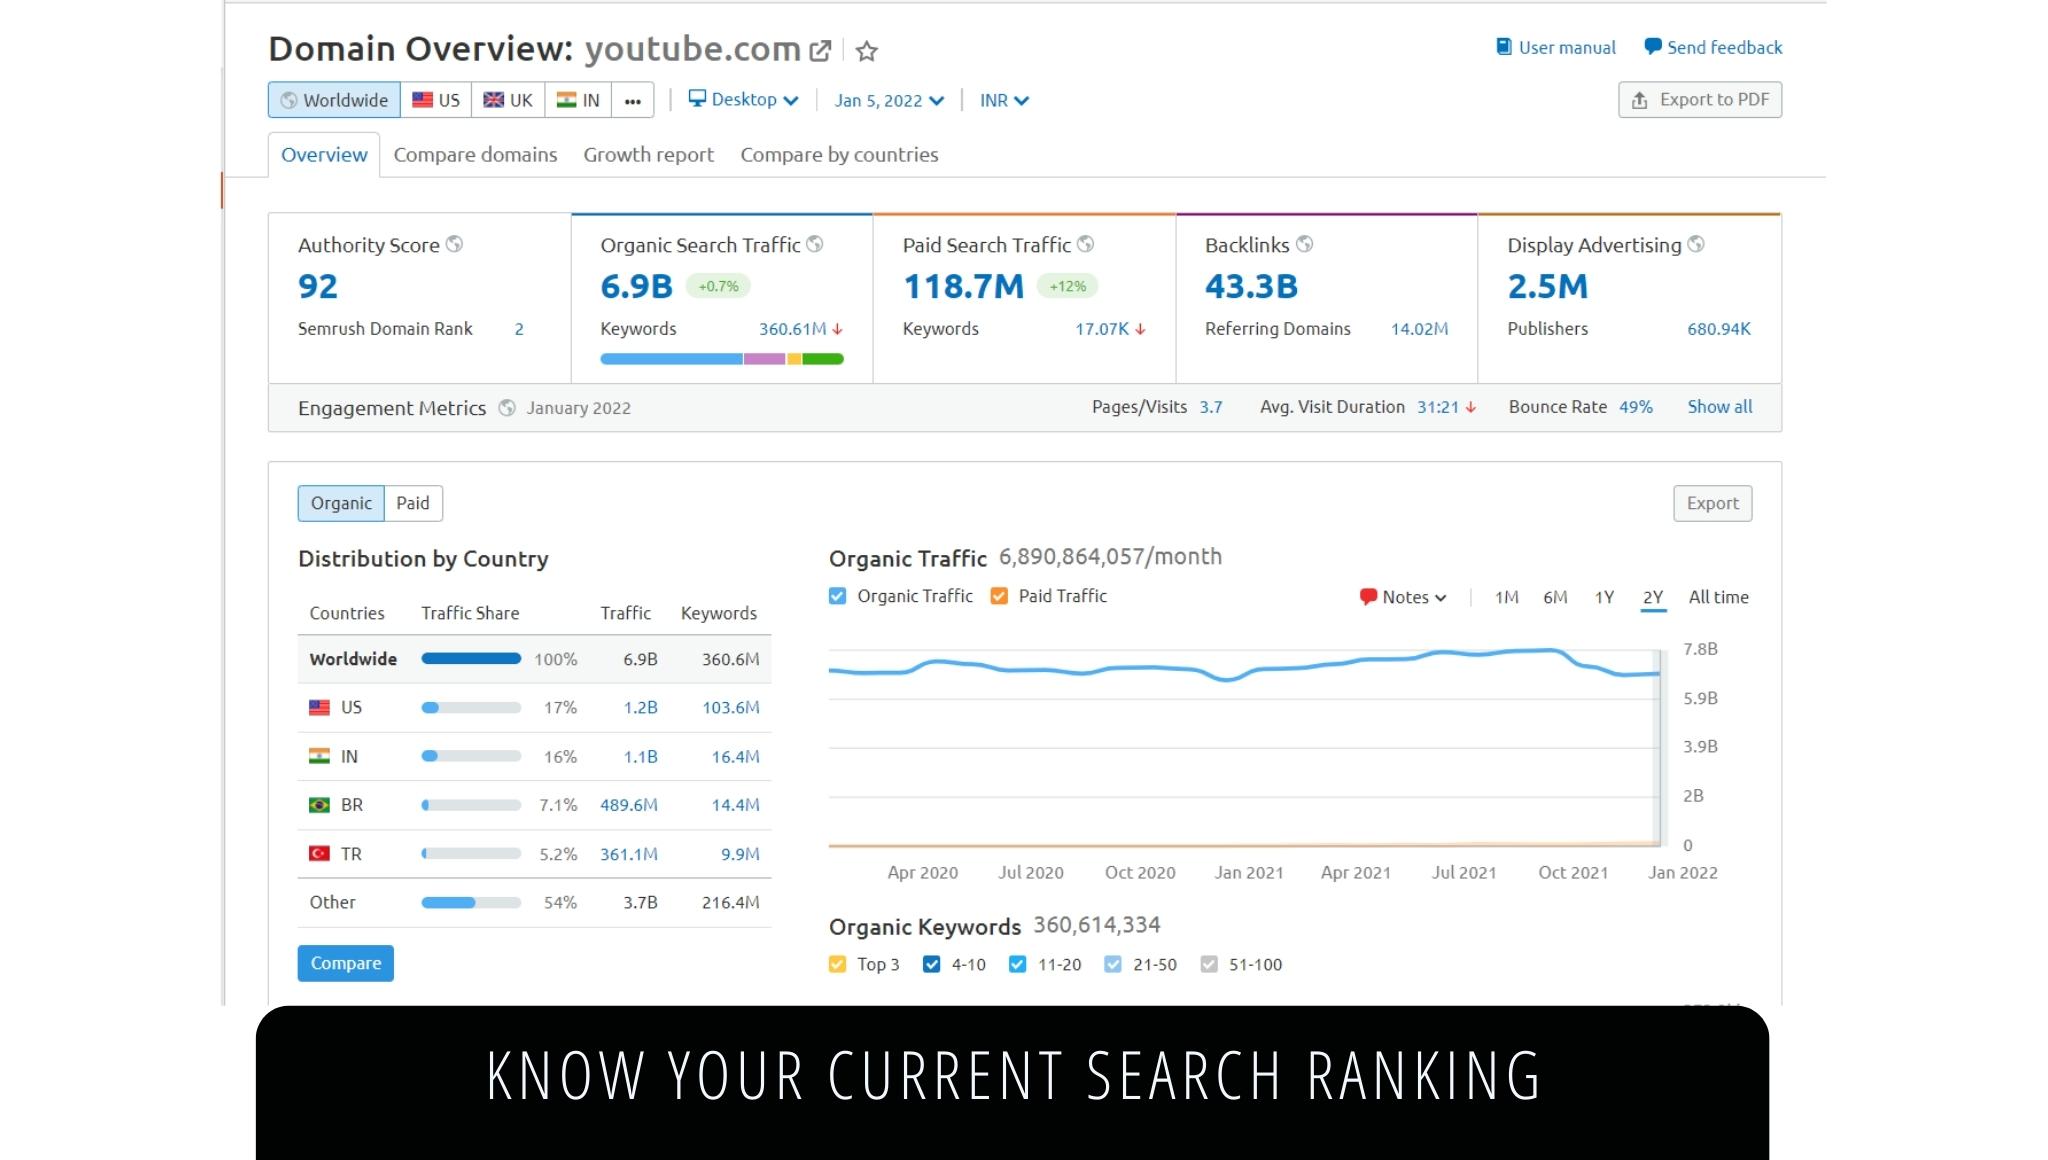 Know your current search ranking